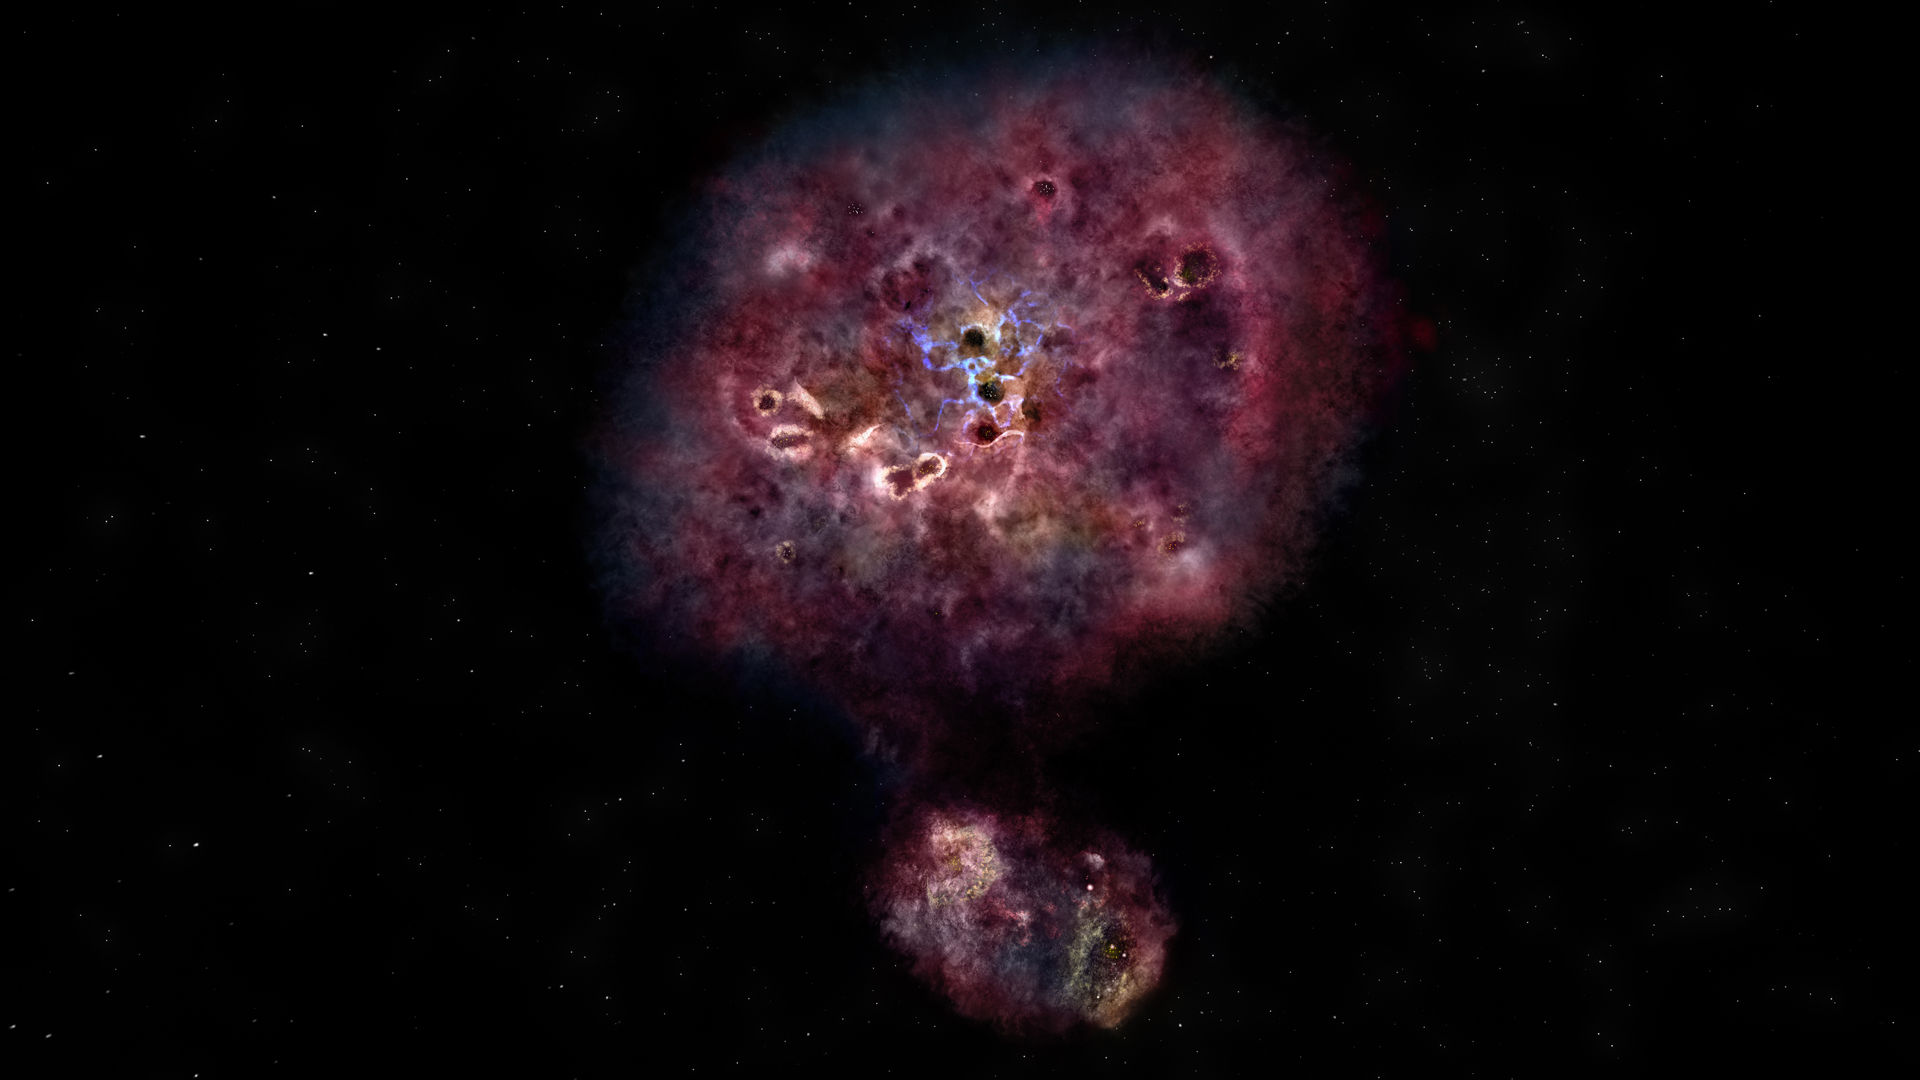 A globular and luminescent representation of a galaxy with bright and dark spots